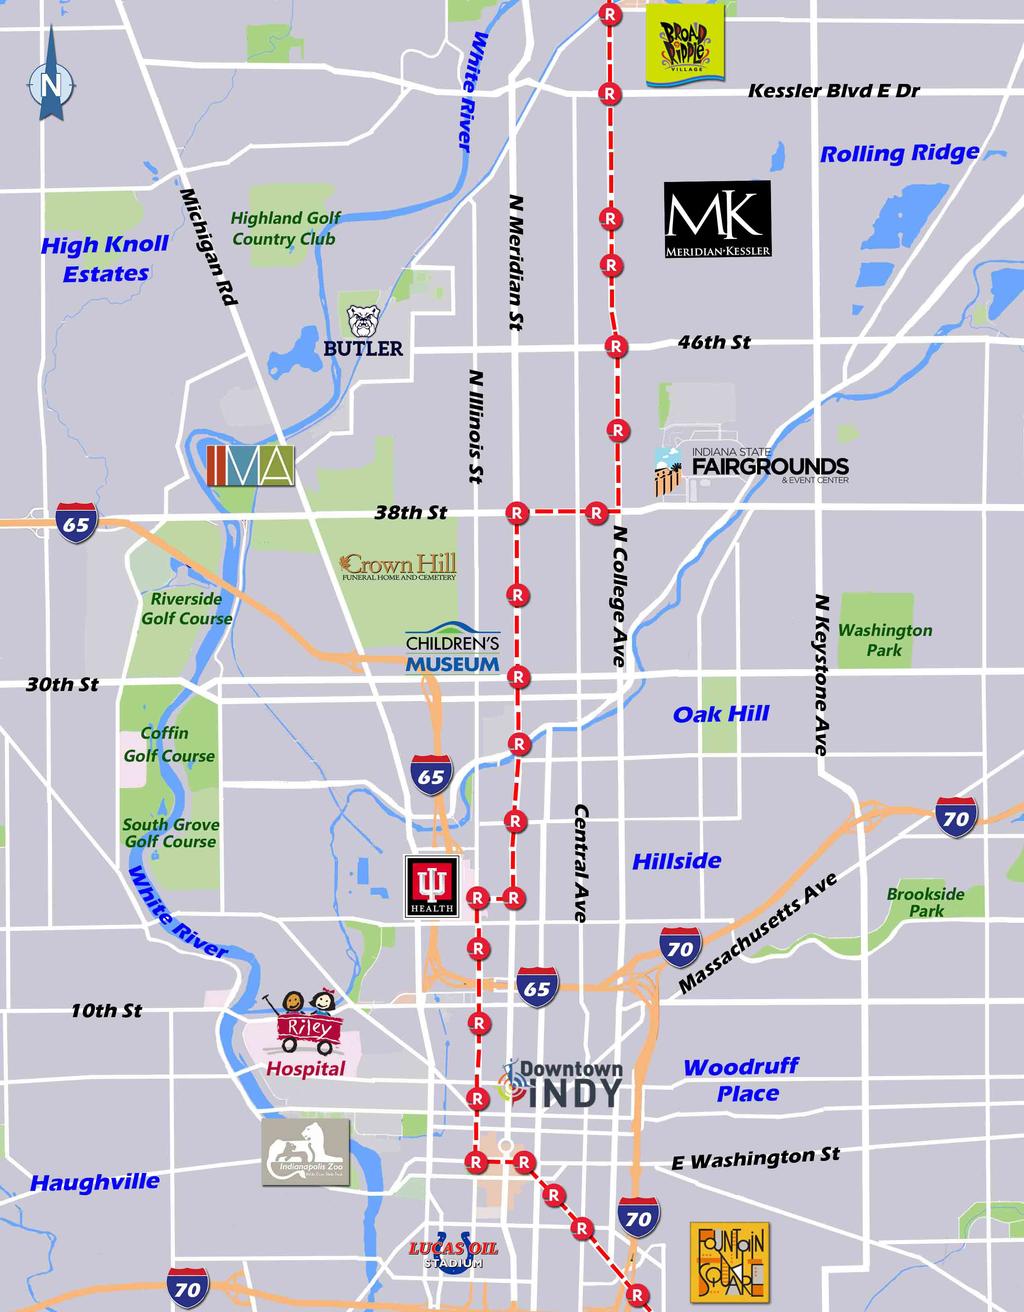 Indy s Red Line Rapid Transit The first all-electric bus rapid transit (BRT) service in the national and the first rapid transit service in Indiana The Red Line BRT will eventually connect the cities